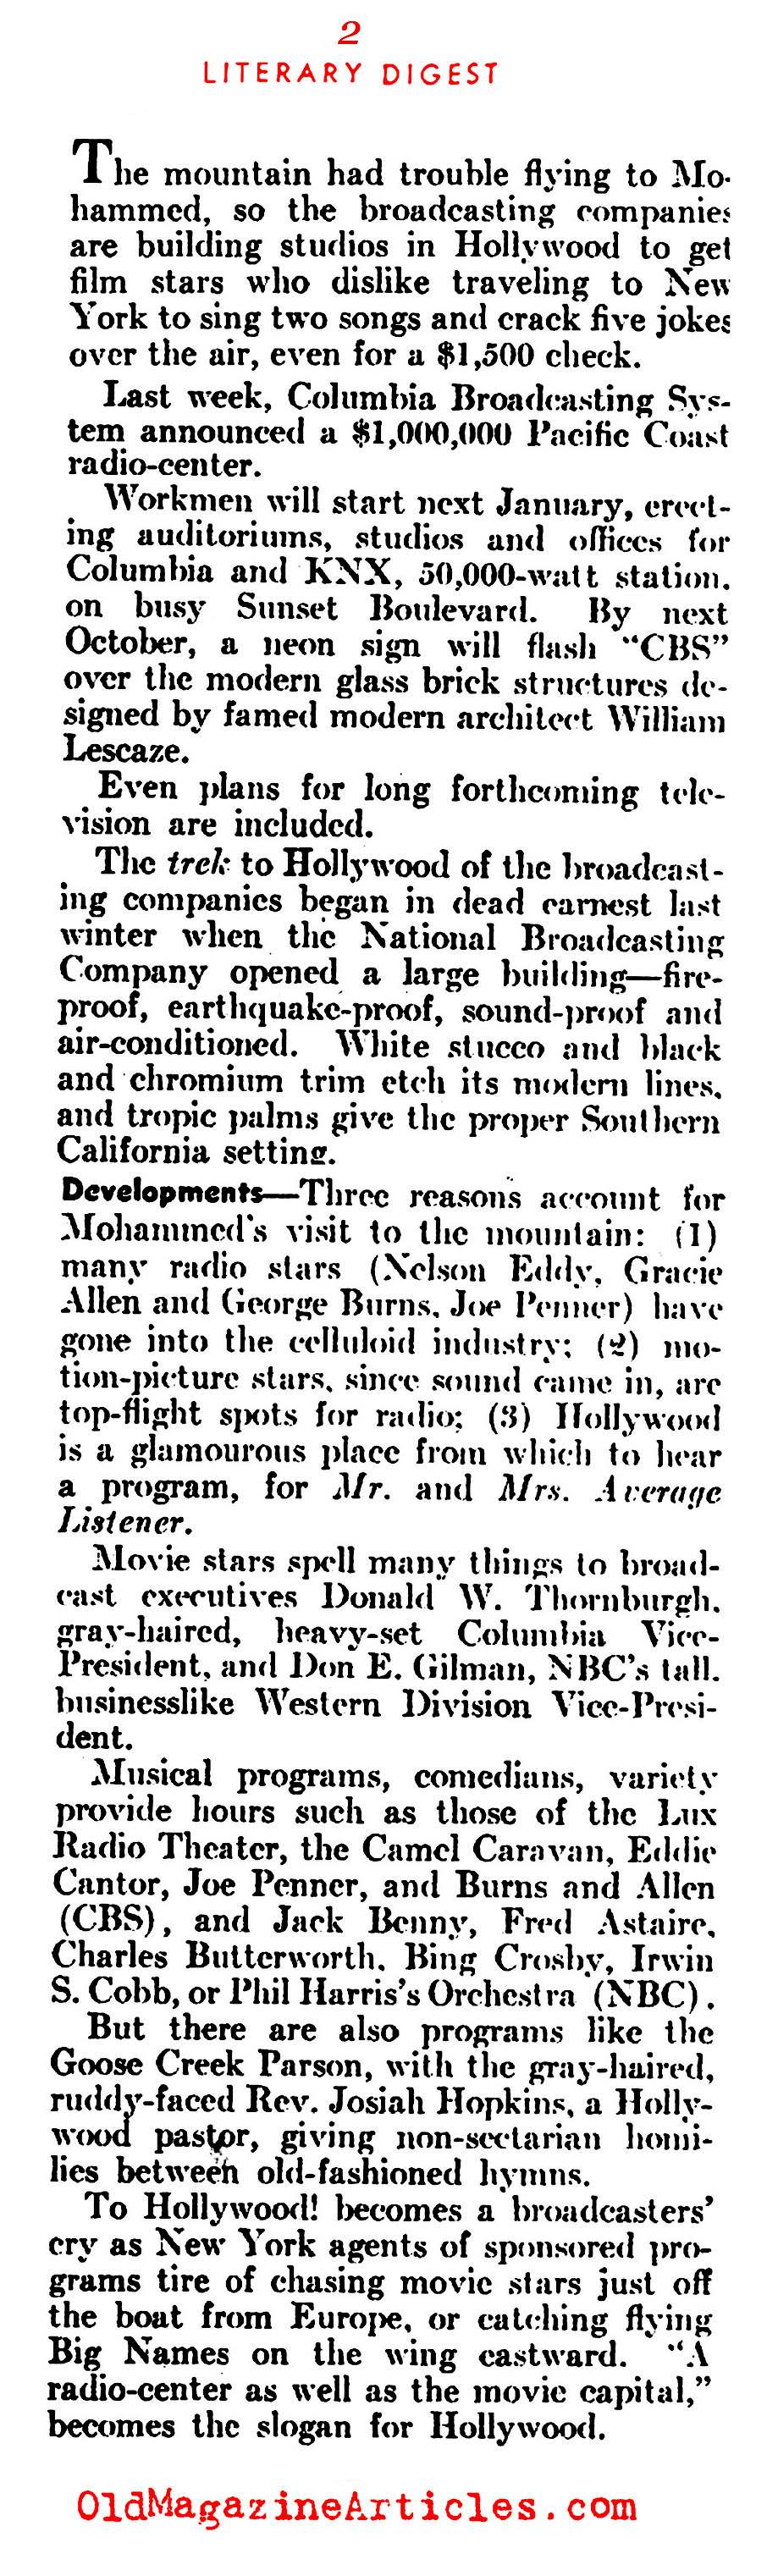 NBC and CBS Open Shop on the West Coast (Literary Digest, 1936)